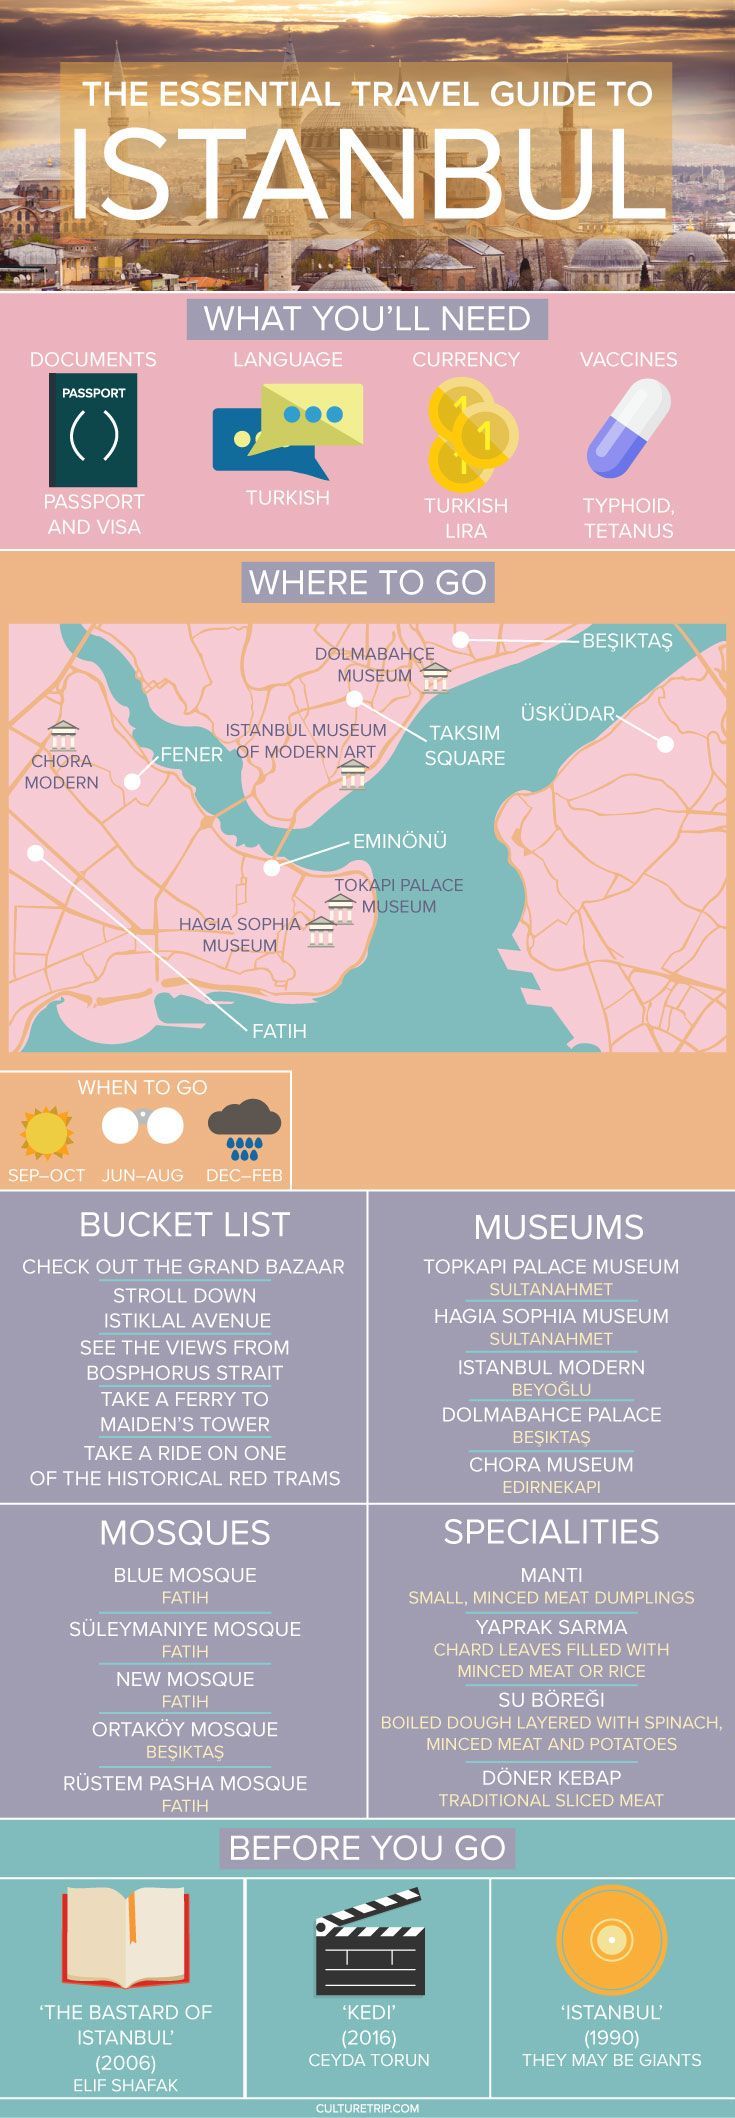 Your Essential Travel Guide to Istanbul (Infographic)